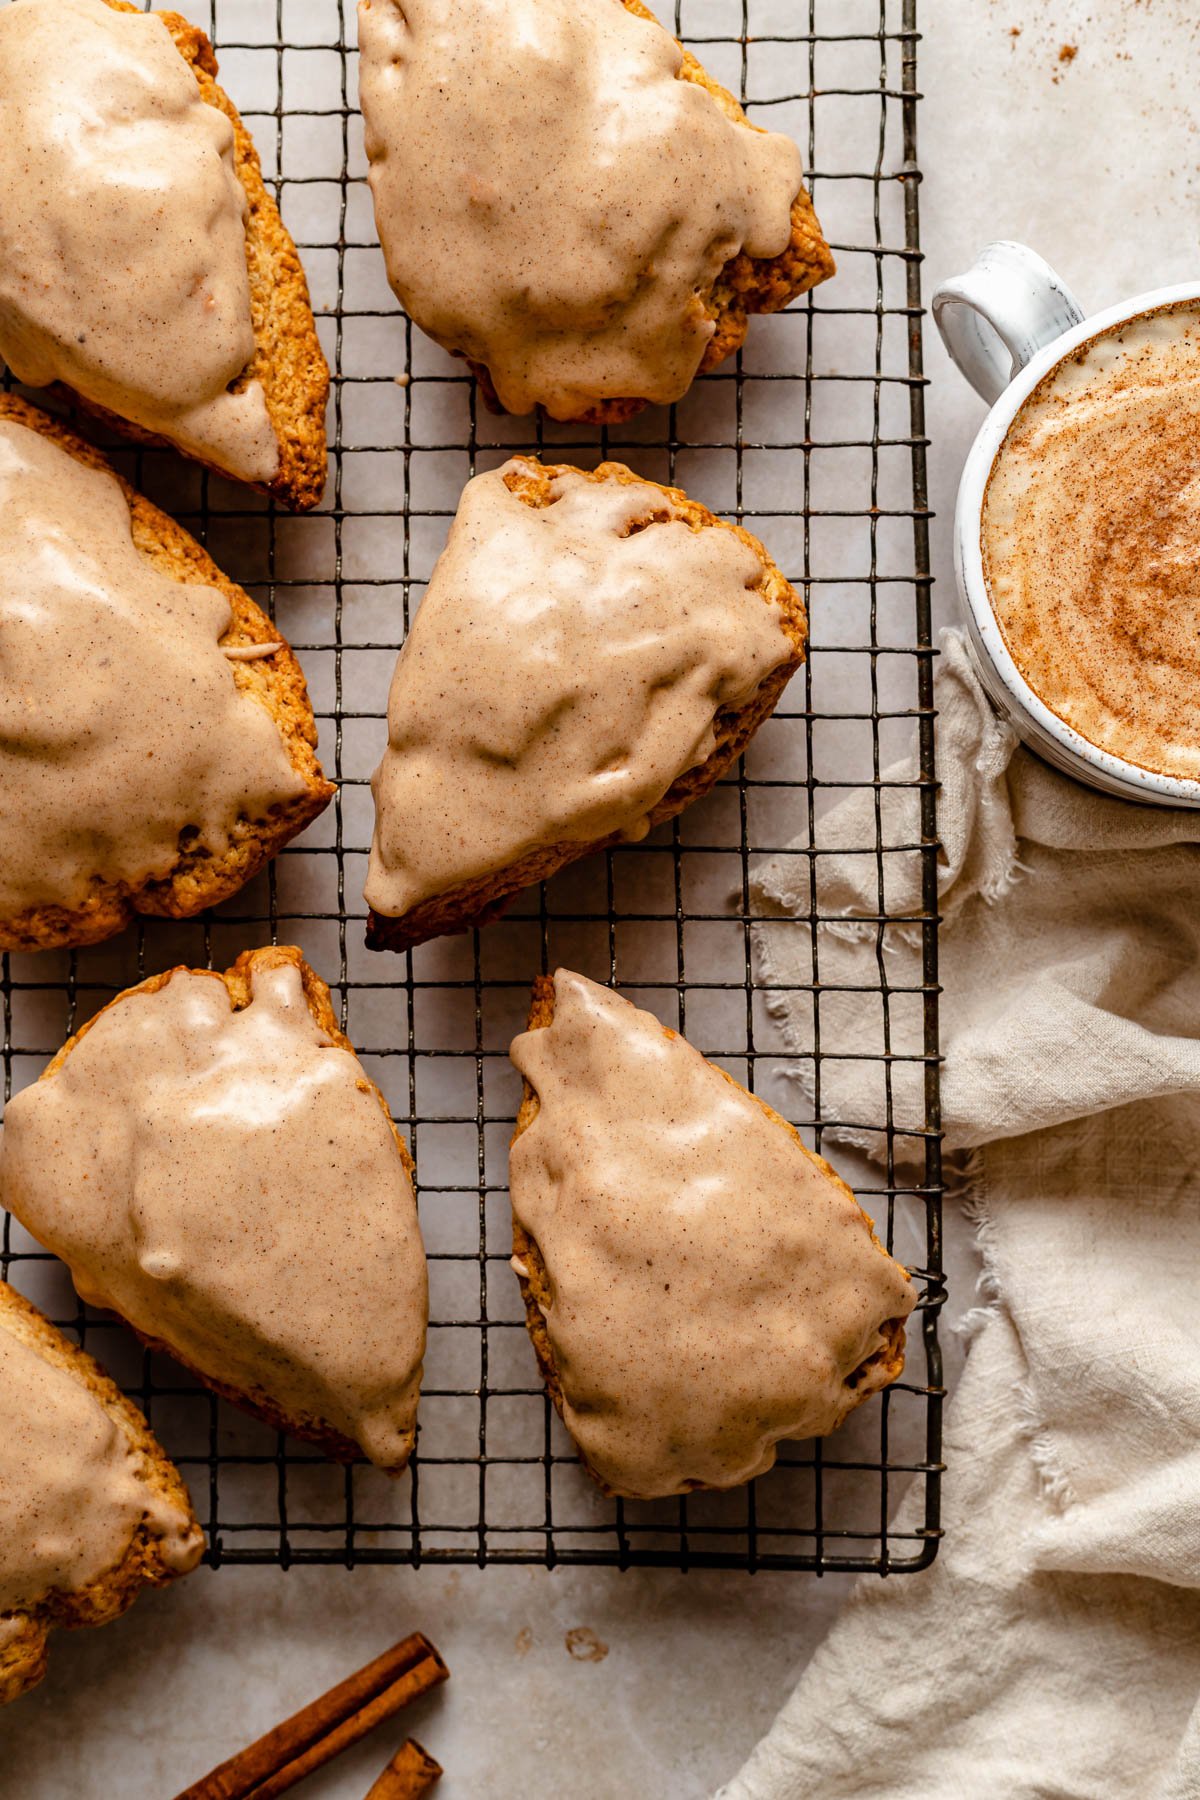 https://playswellwithbutter.com/wp-content/uploads/2020/11/Chai-Scones-with-Maple-Chai-Glaze-11.jpg